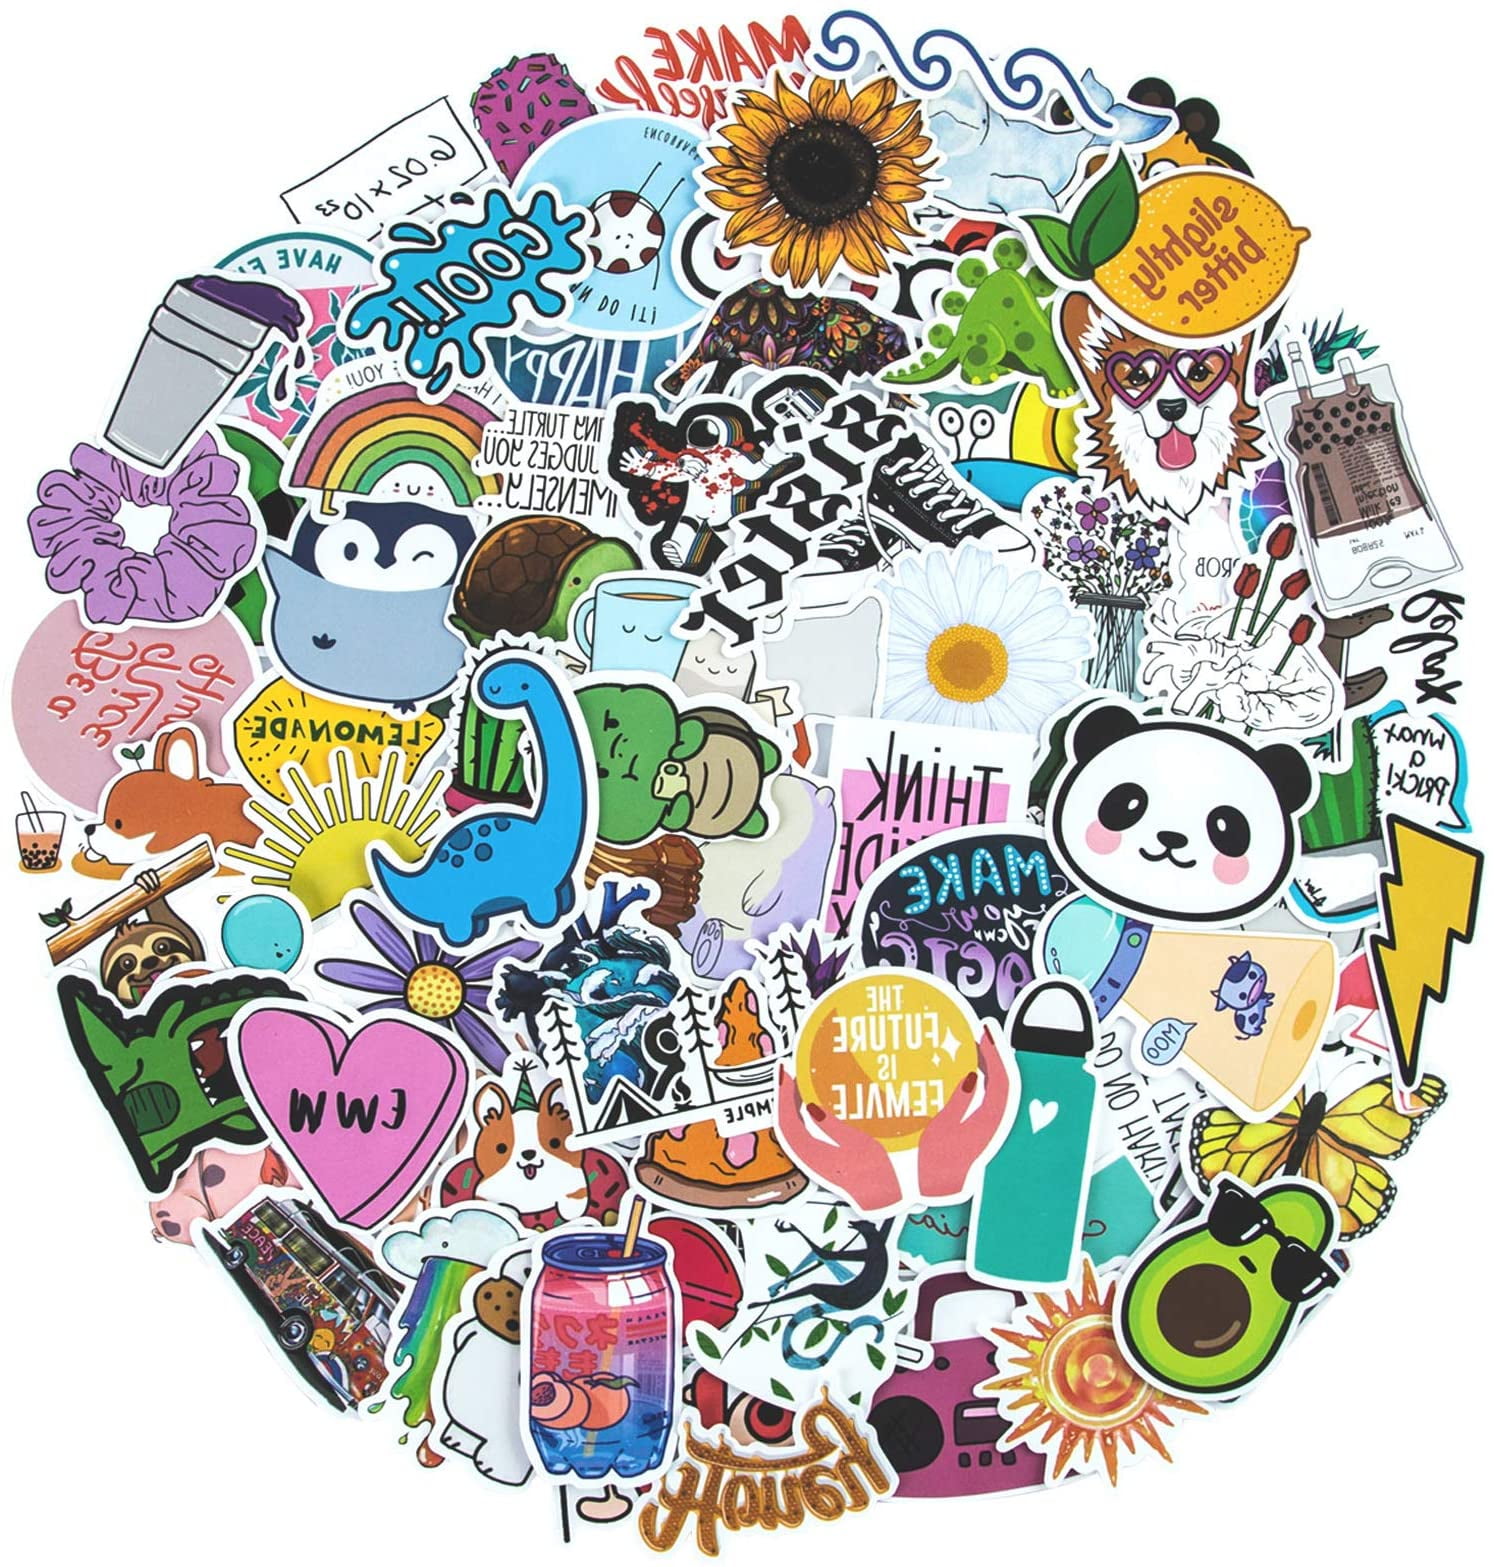 Details about   Sticker printing just supply us with your images or artwork 